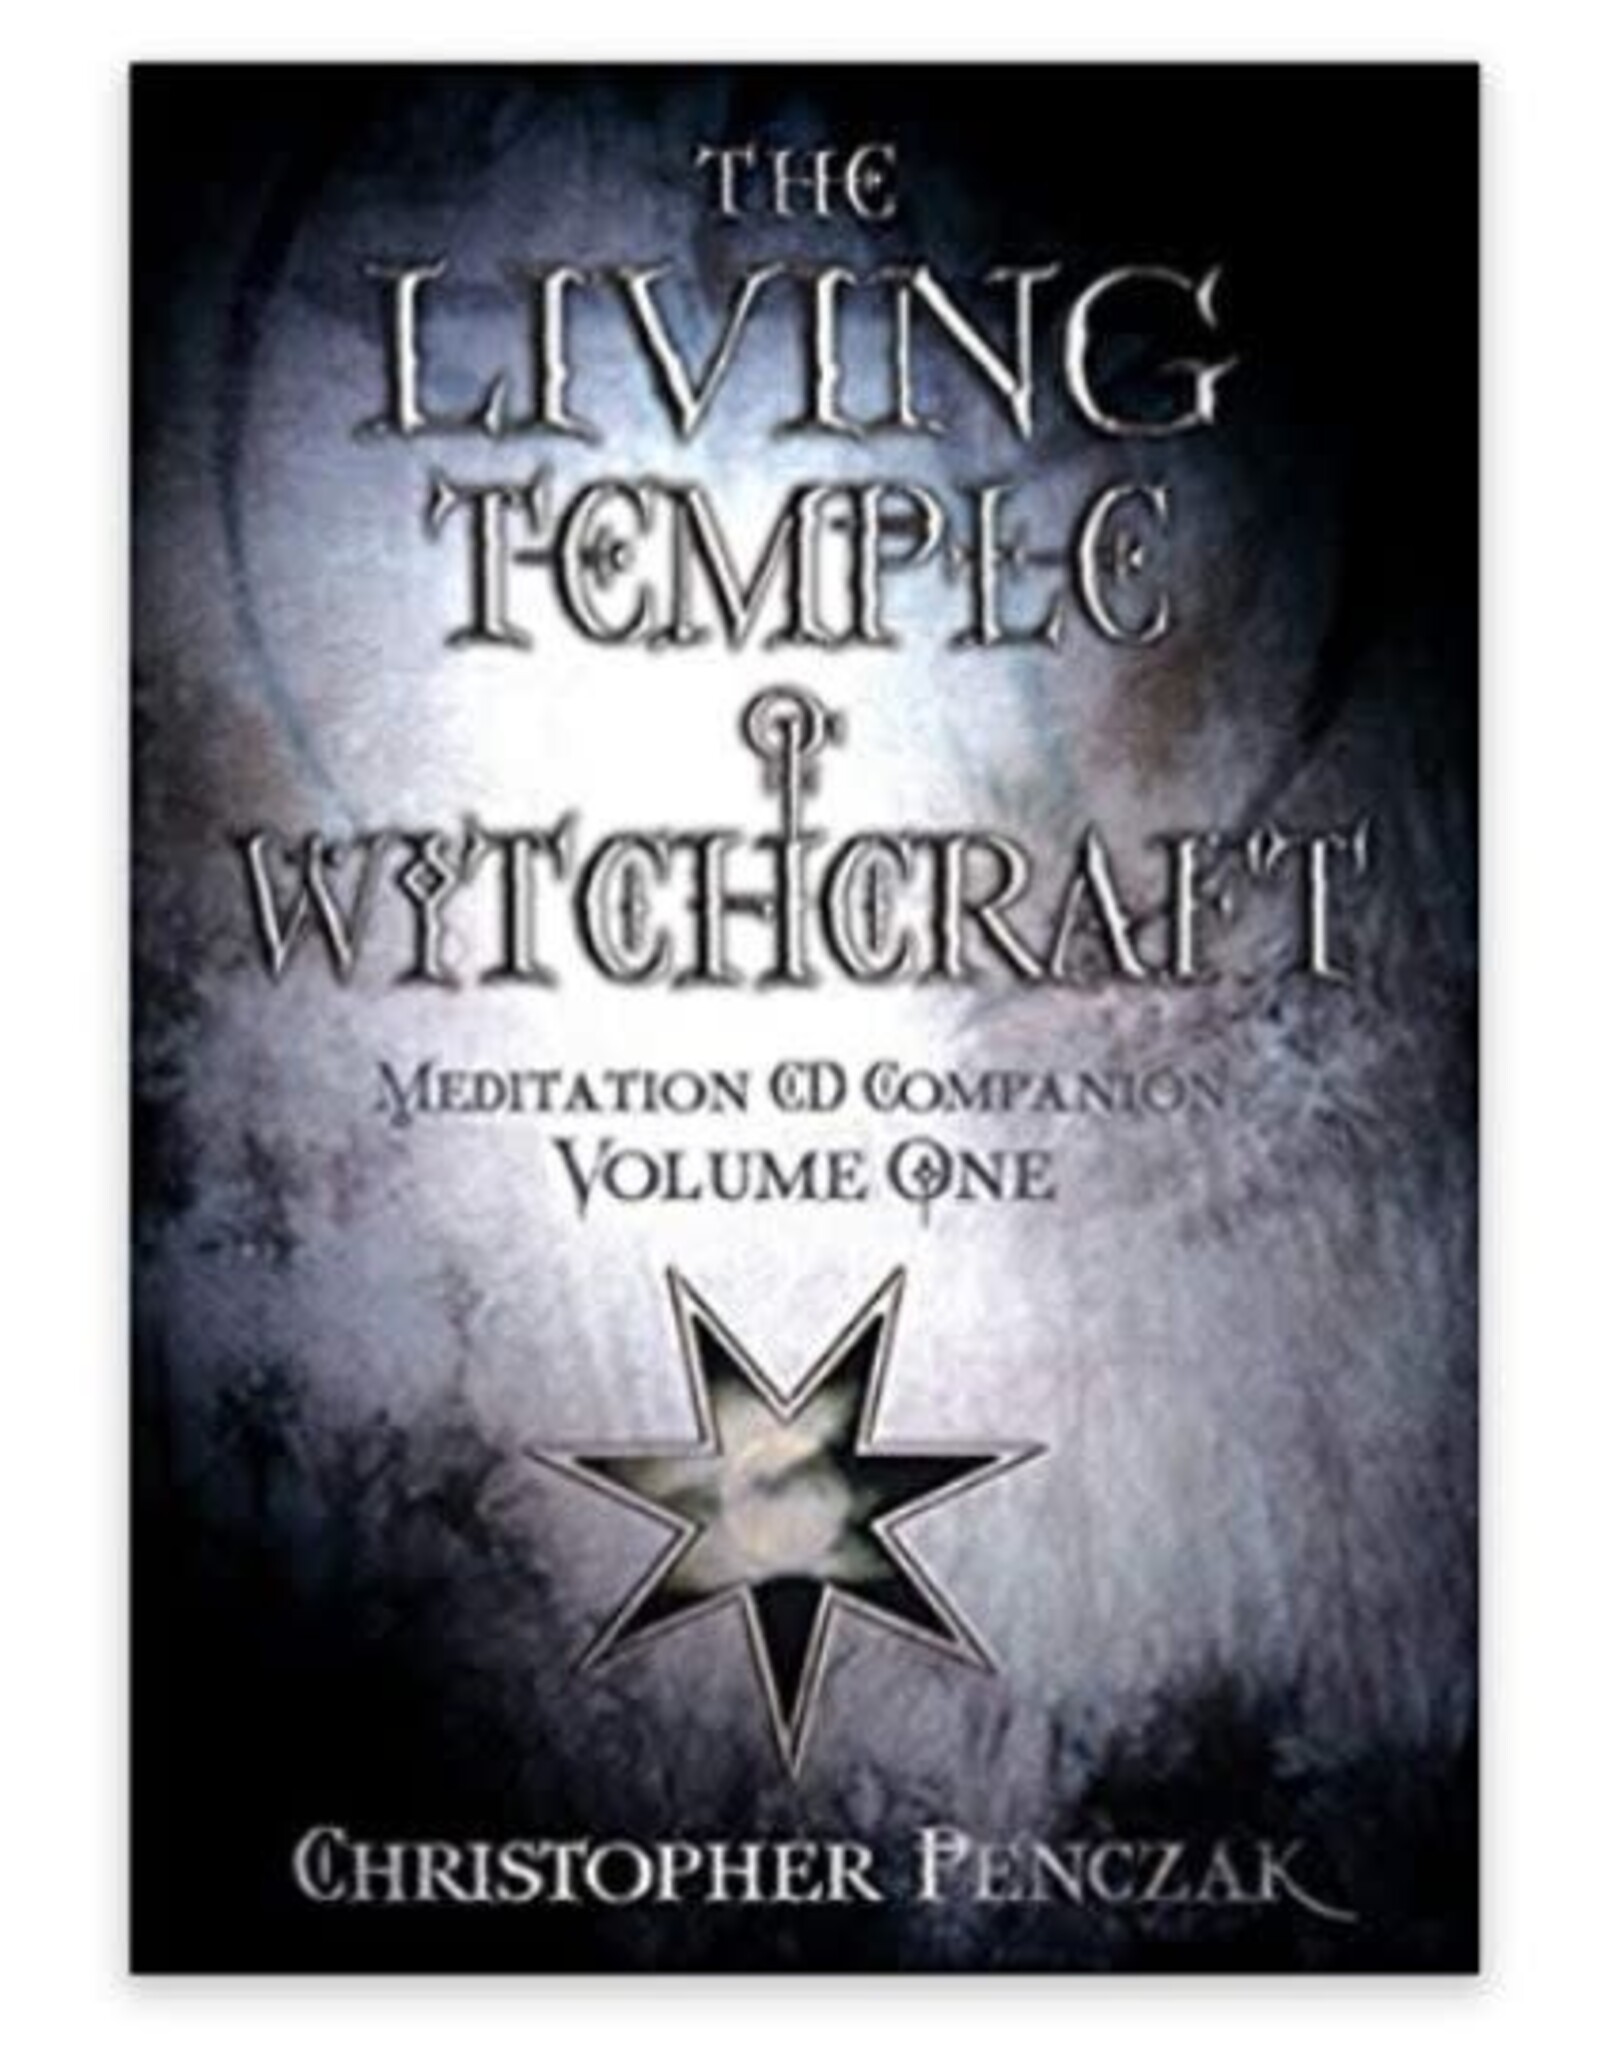 Christopher Penczak Living Temple of Witchcraft Vol 1 by Christopher Penczak